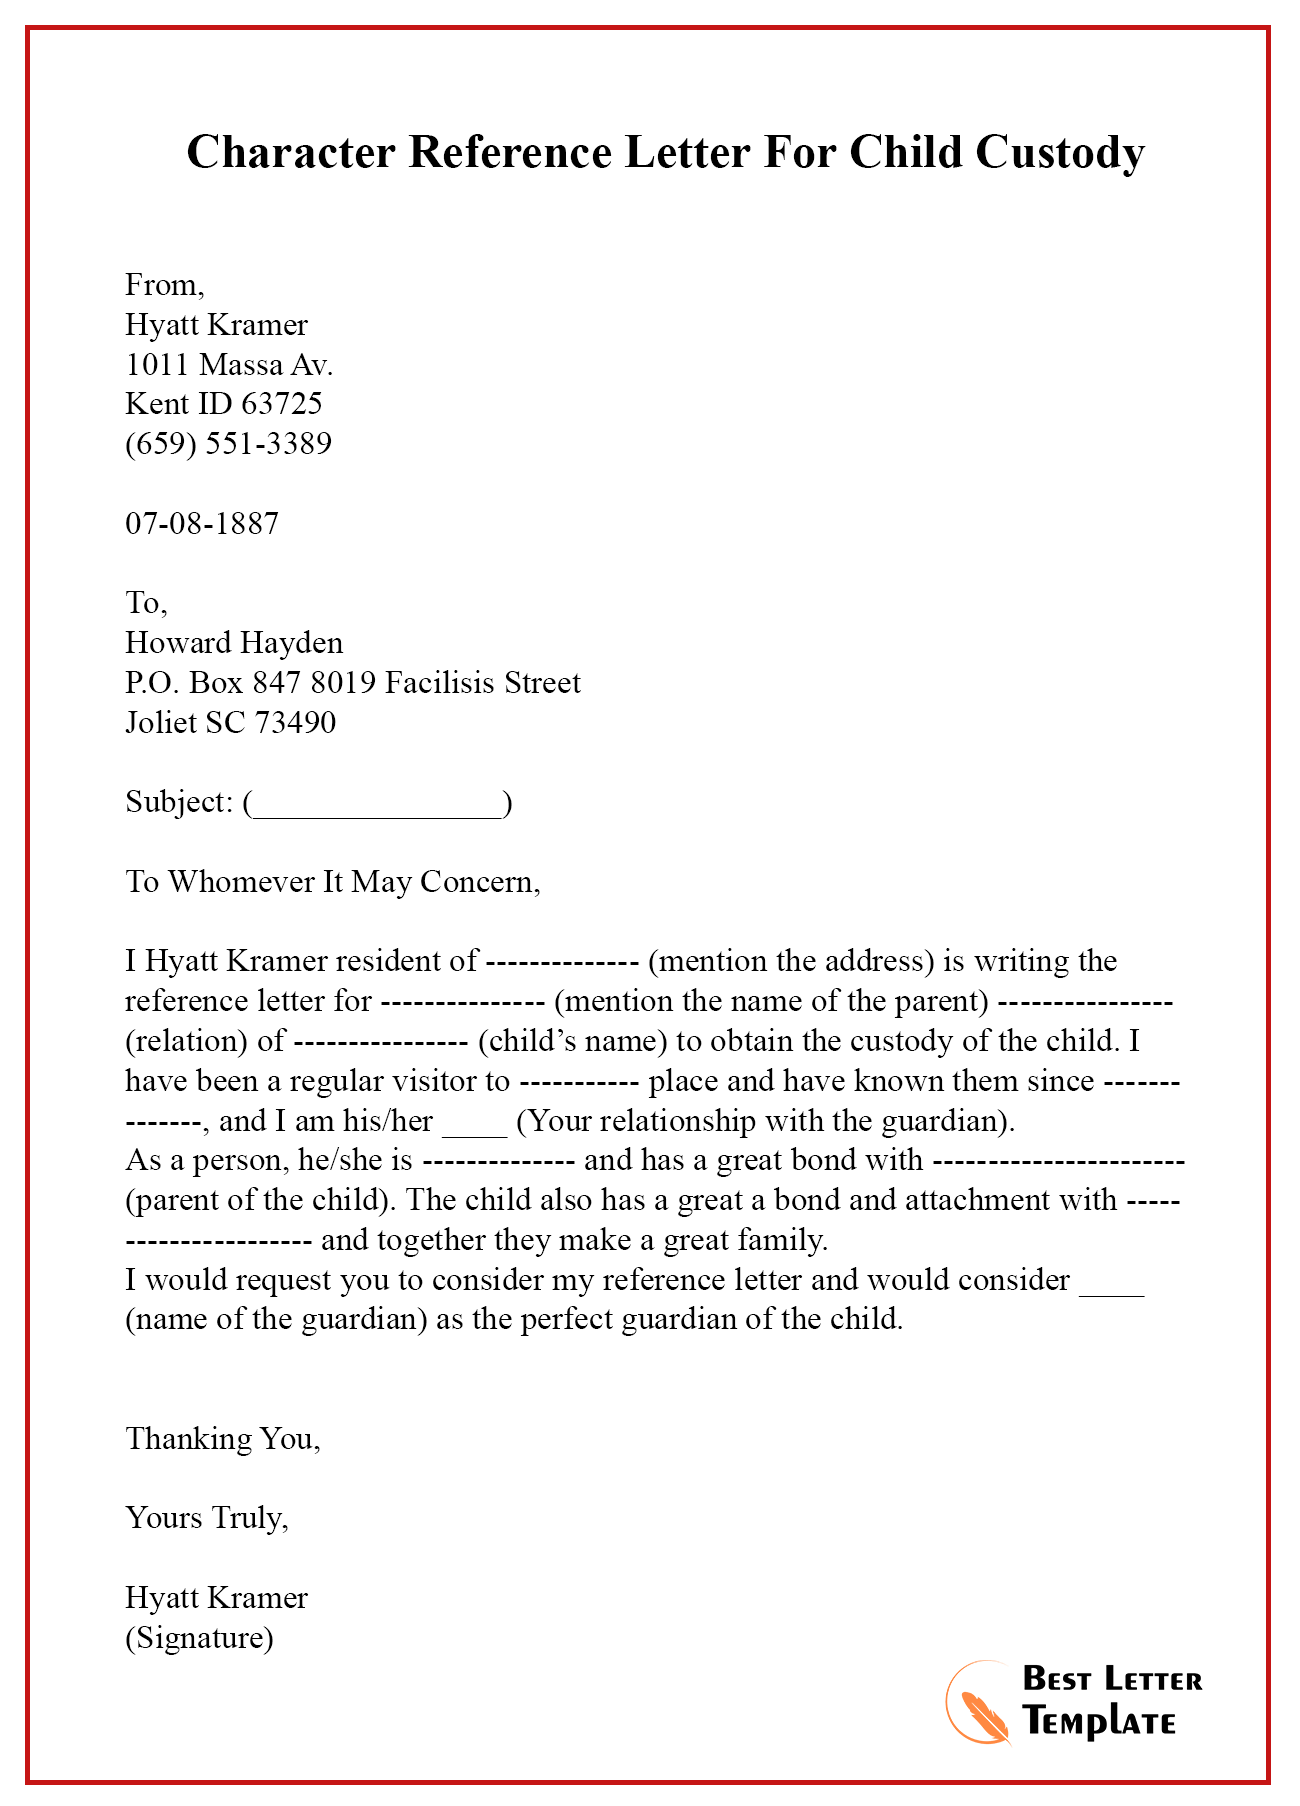 character-reference-letter-for-child-custody-best-letter-template